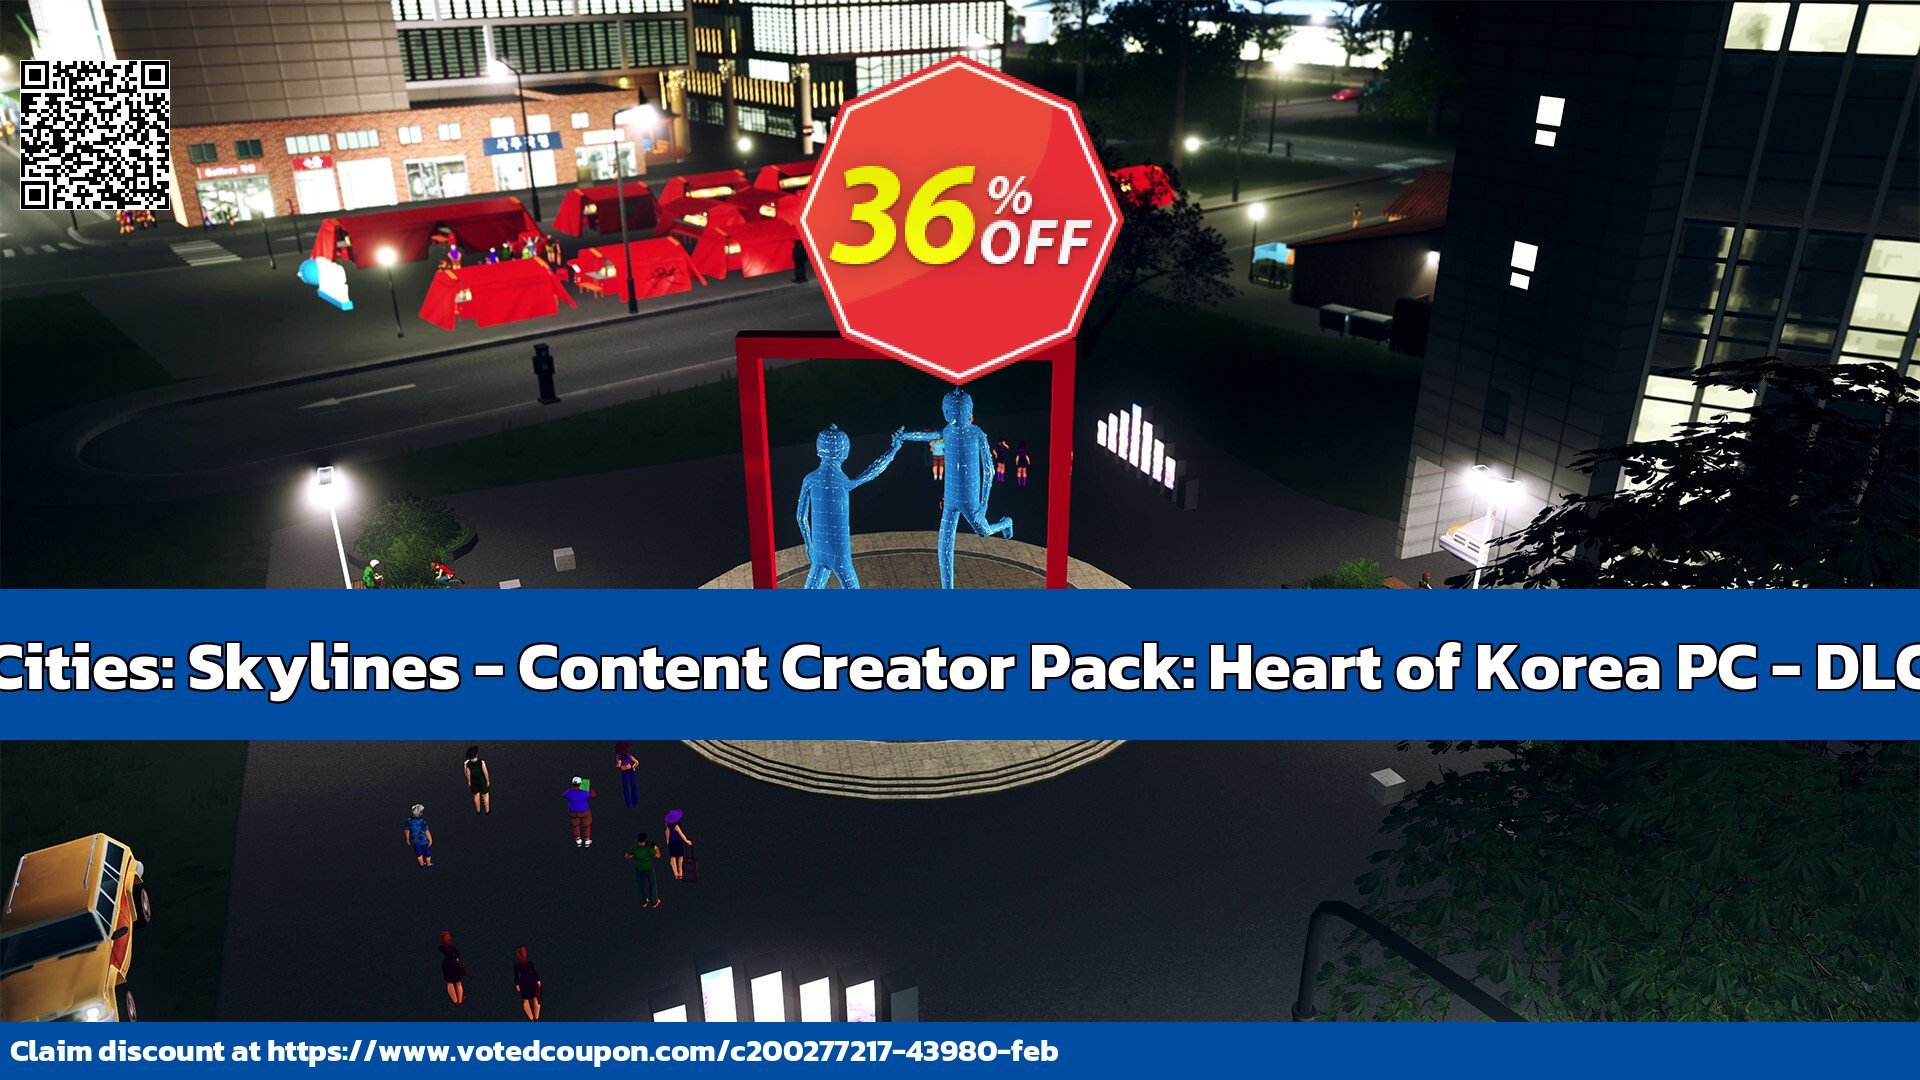 Cities: Skylines - Content Creator Pack: Heart of Korea PC - DLC Coupon Code May 2024, 44% OFF - VotedCoupon